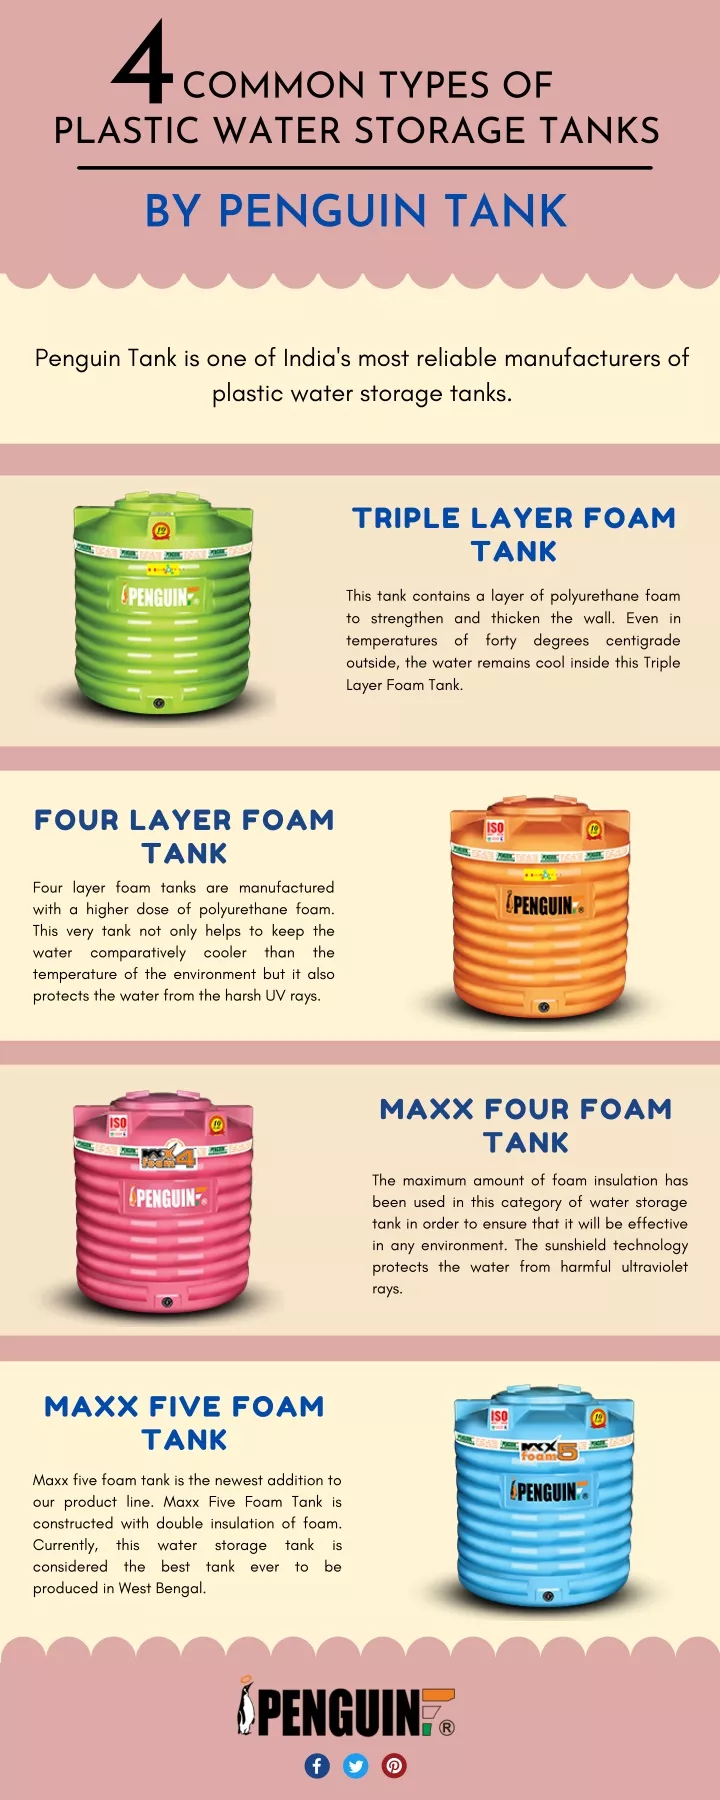 PPT - 4 Common Types of Plastic Water Storage Tanks